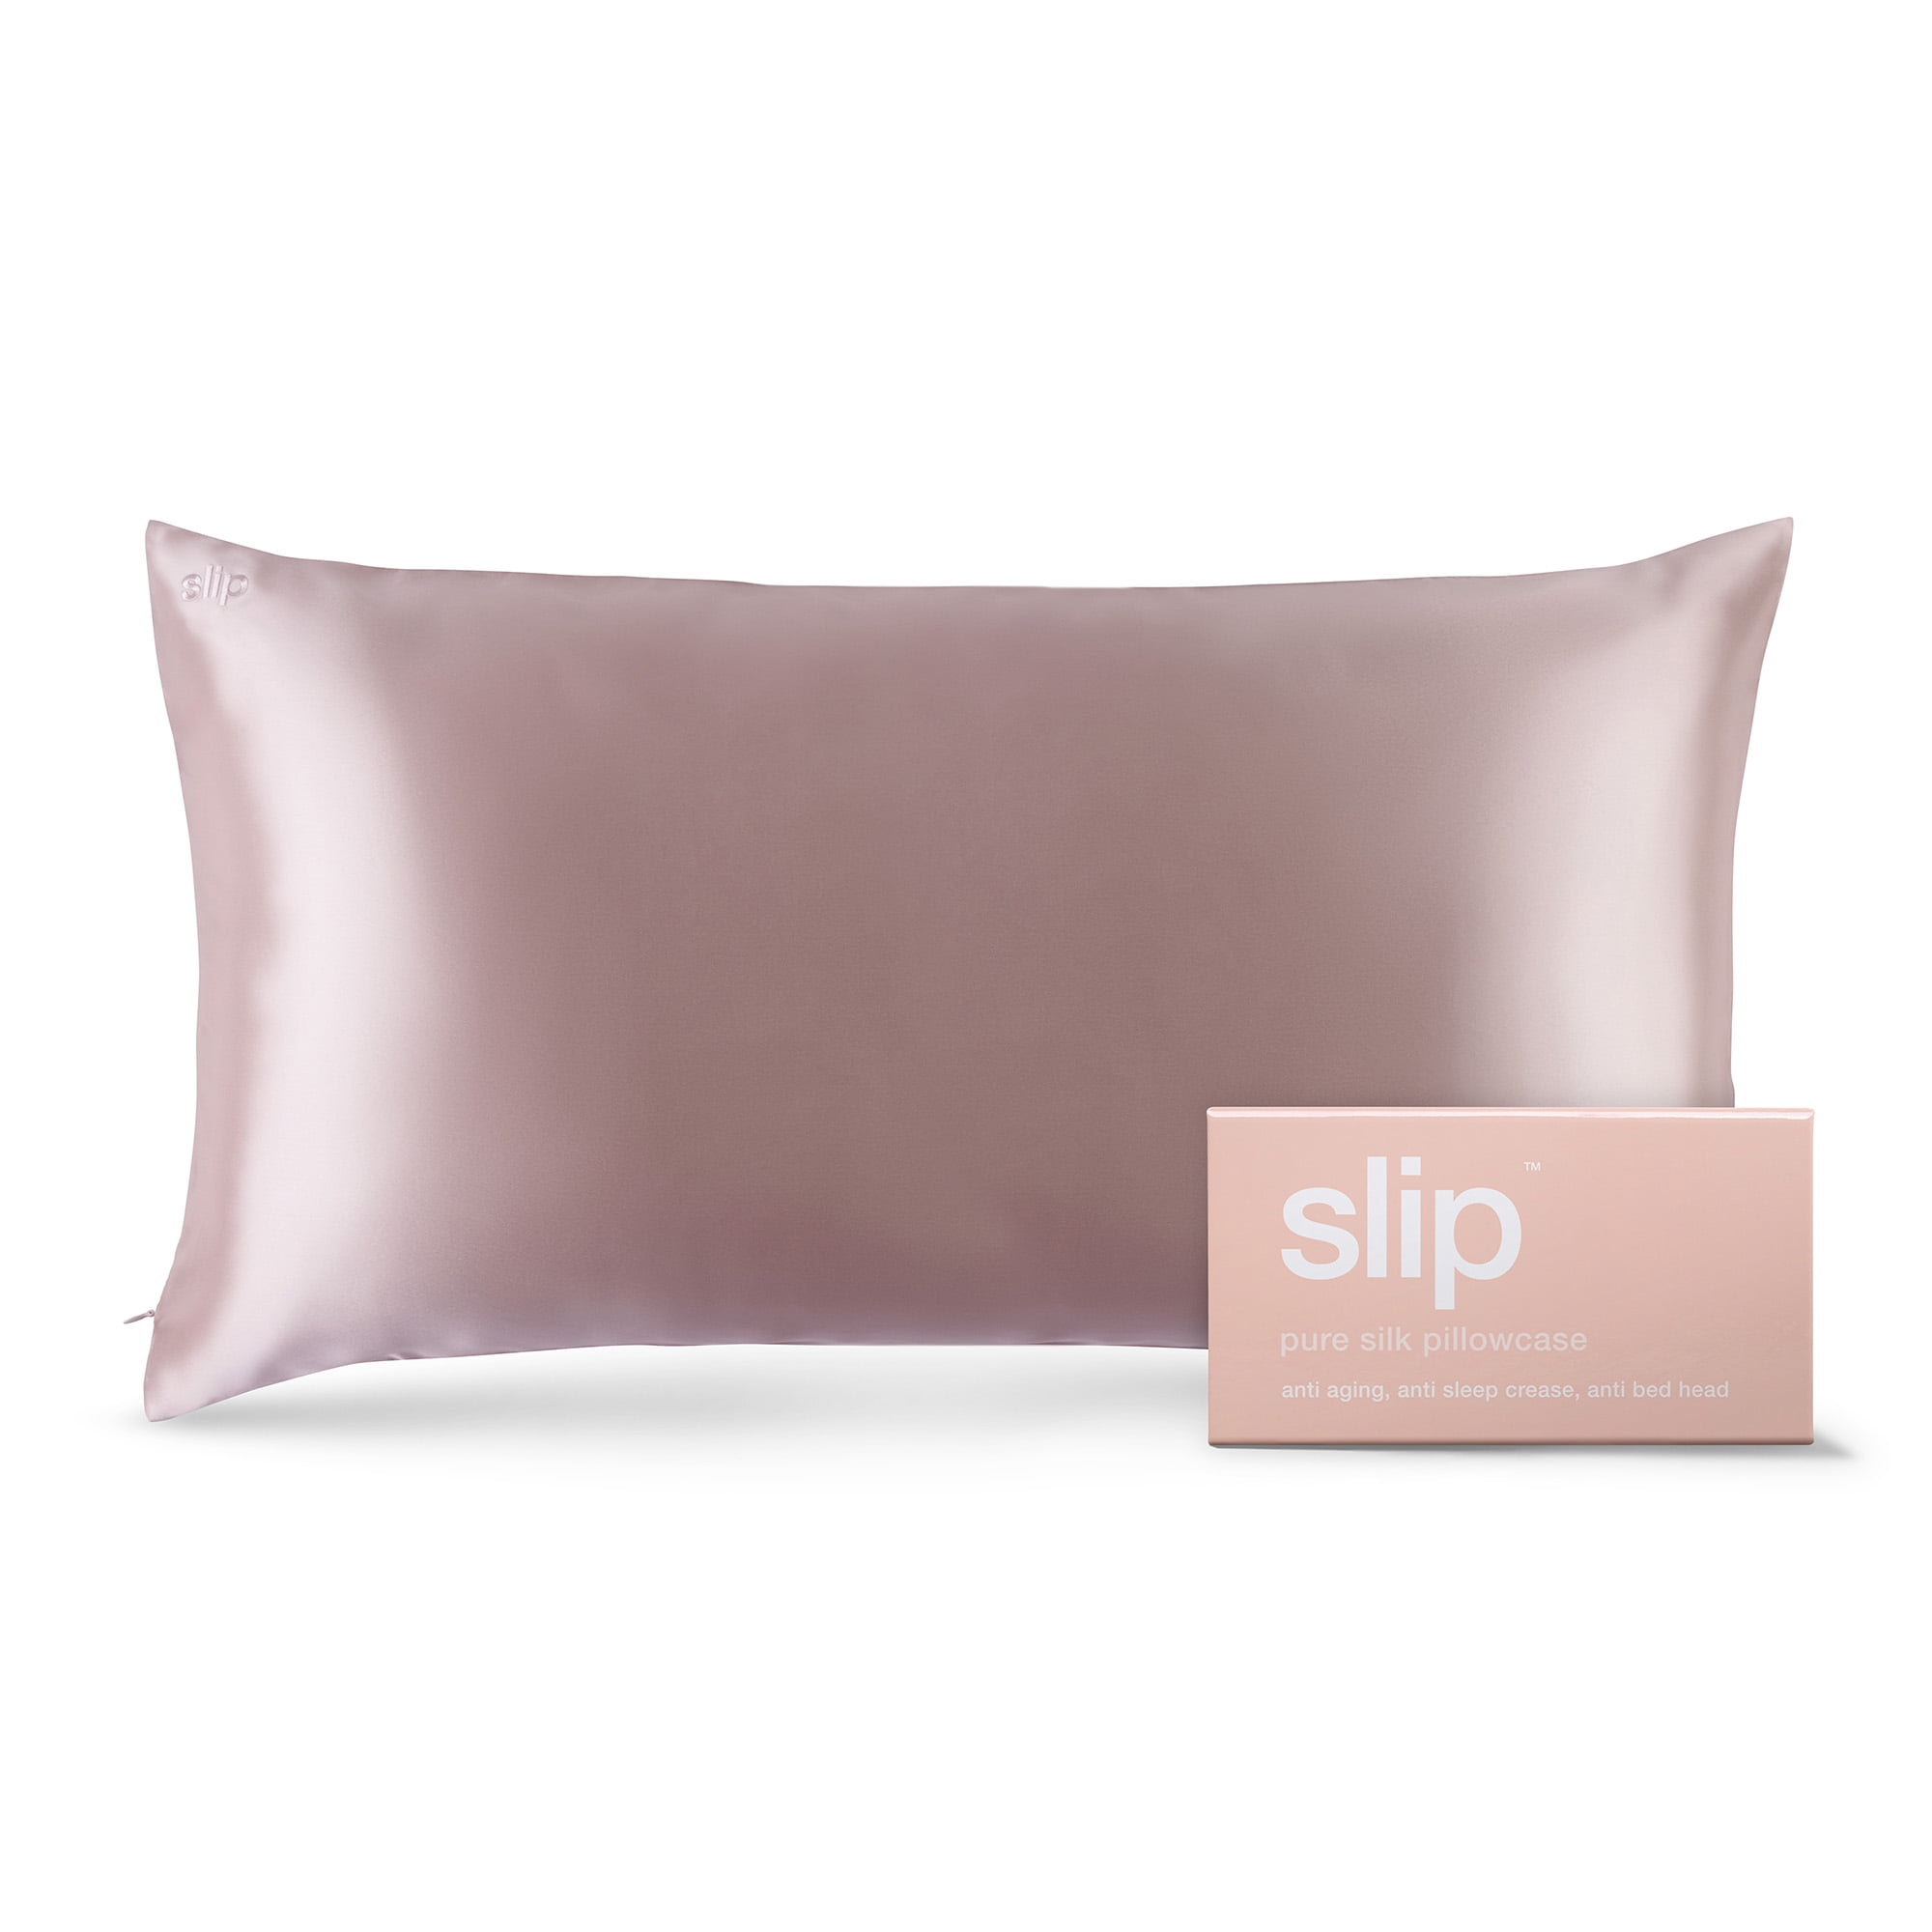 Slipssy Anti-Aging Pillow Cover King Size